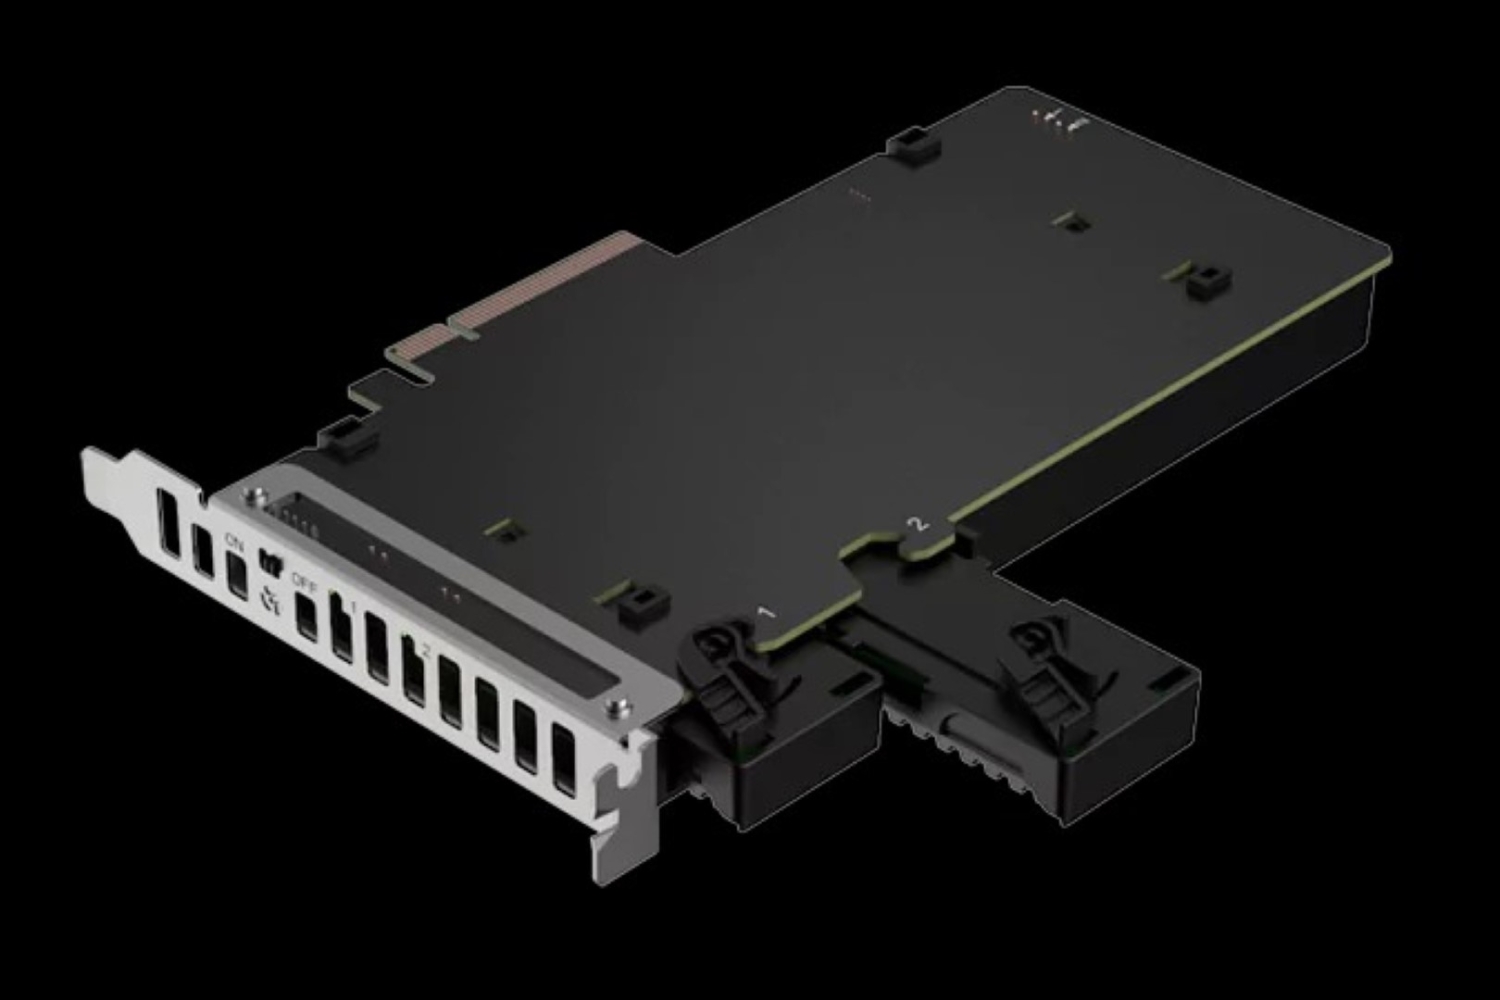 ICY DOCK Unveils Concept PCIe Gen5 M.2 & E1.S SSD Adapter Cards With  Active-Cooling Tech